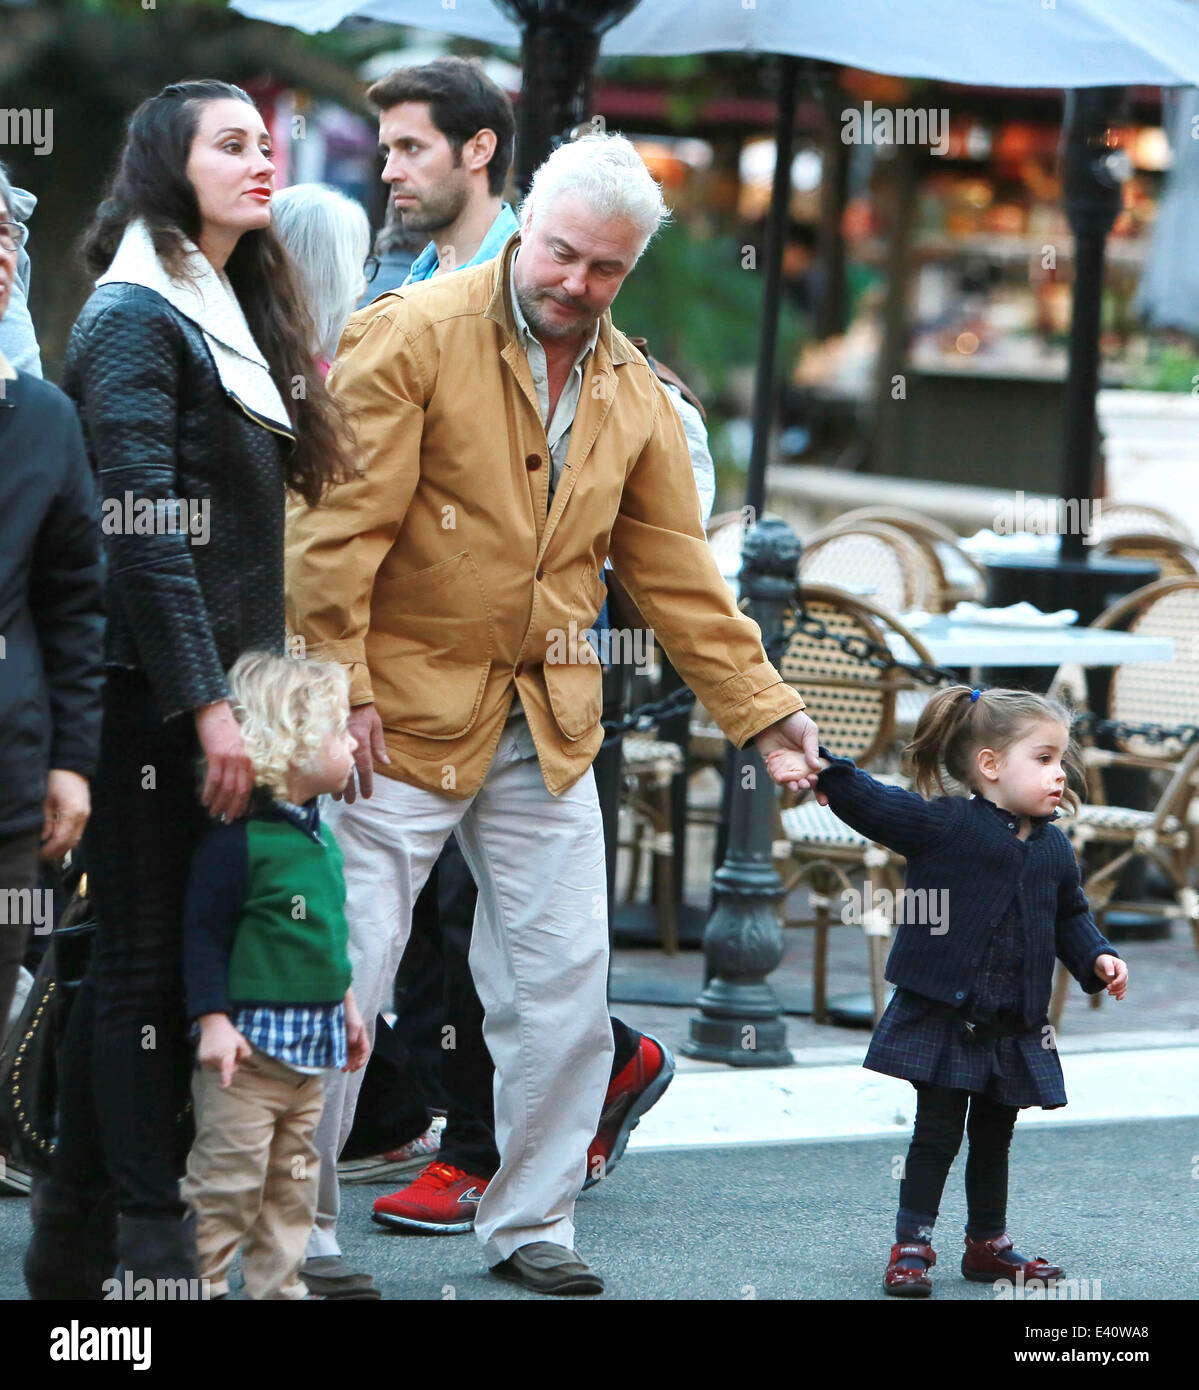 CSI star William L Petersen out with his wife Gina and two year old twins visit The Grove shopping Mall in West Hollywood  Featuring: Gina Cirone,William L Petersen Where: Los Angeles, California, United States When: 11 Dec 2013 Stock Photo